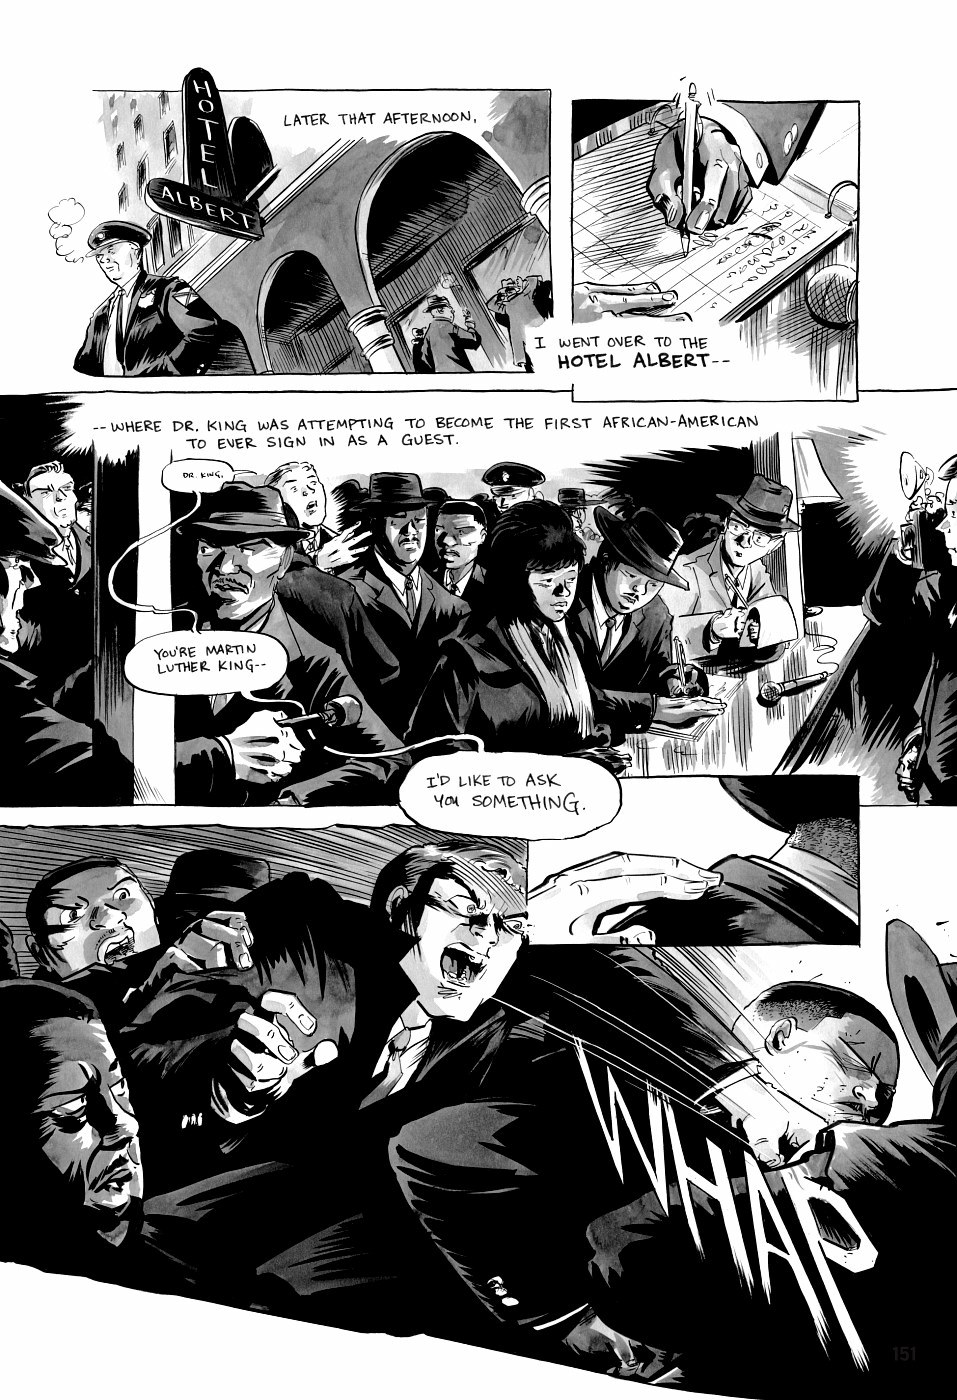 page 151 of march book three graphic novel